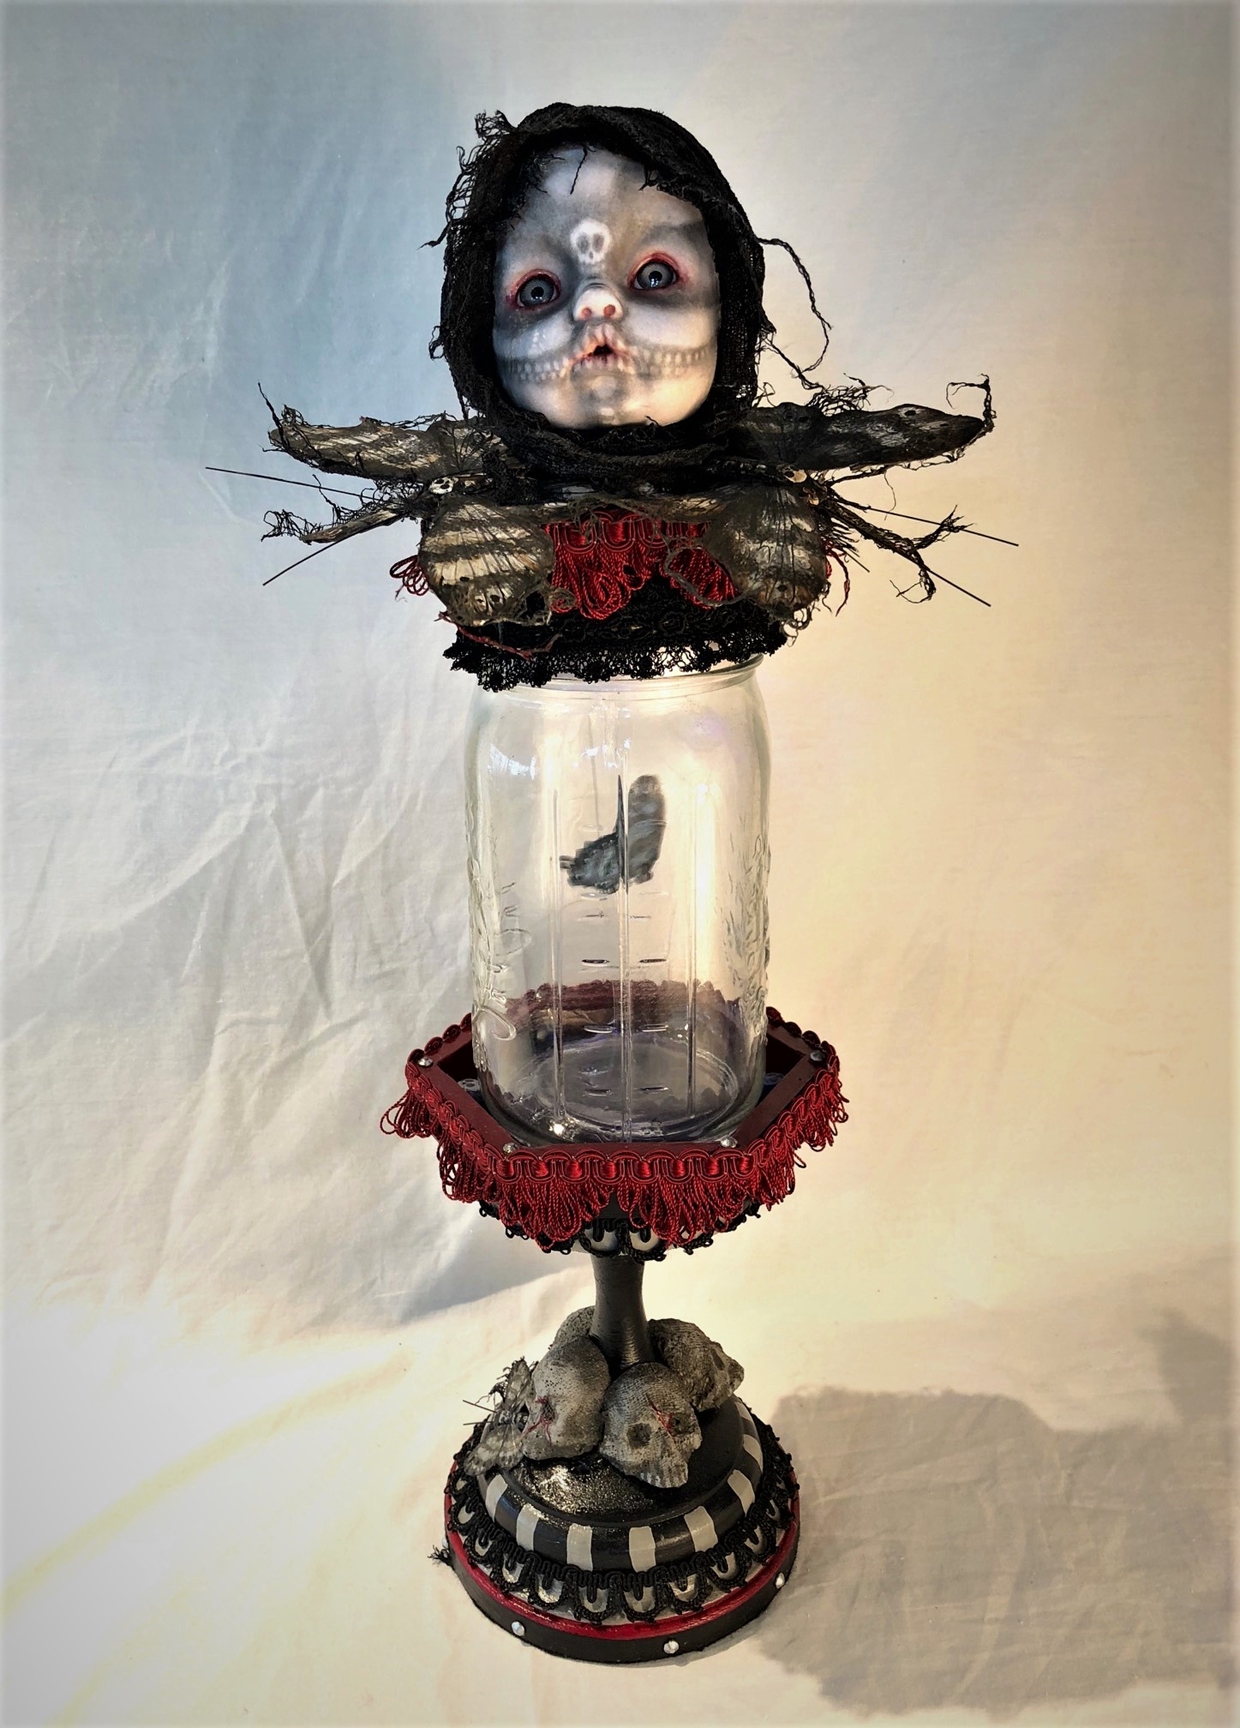 mixed media assemblage gothic day of the dead skeleton babydoll head repaint on top of mason jar holding toy moth on skull-adorned pedestal